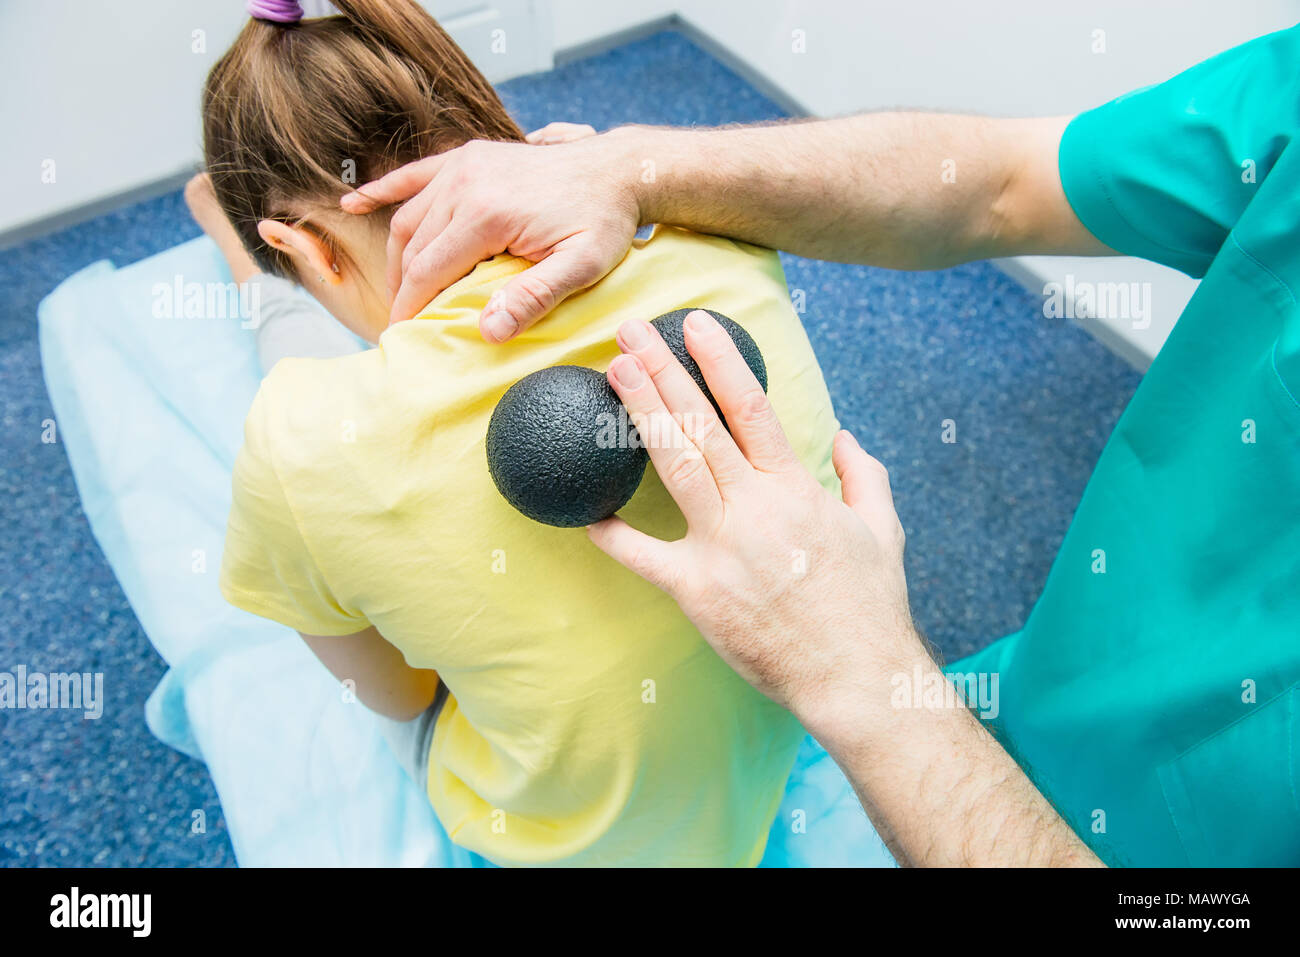 Woman at the physiotherapy receiving ball massage from therapist. A chiropractor treats patient's thoracic spine in medical office. Neurology, Osteopa Stock Photo